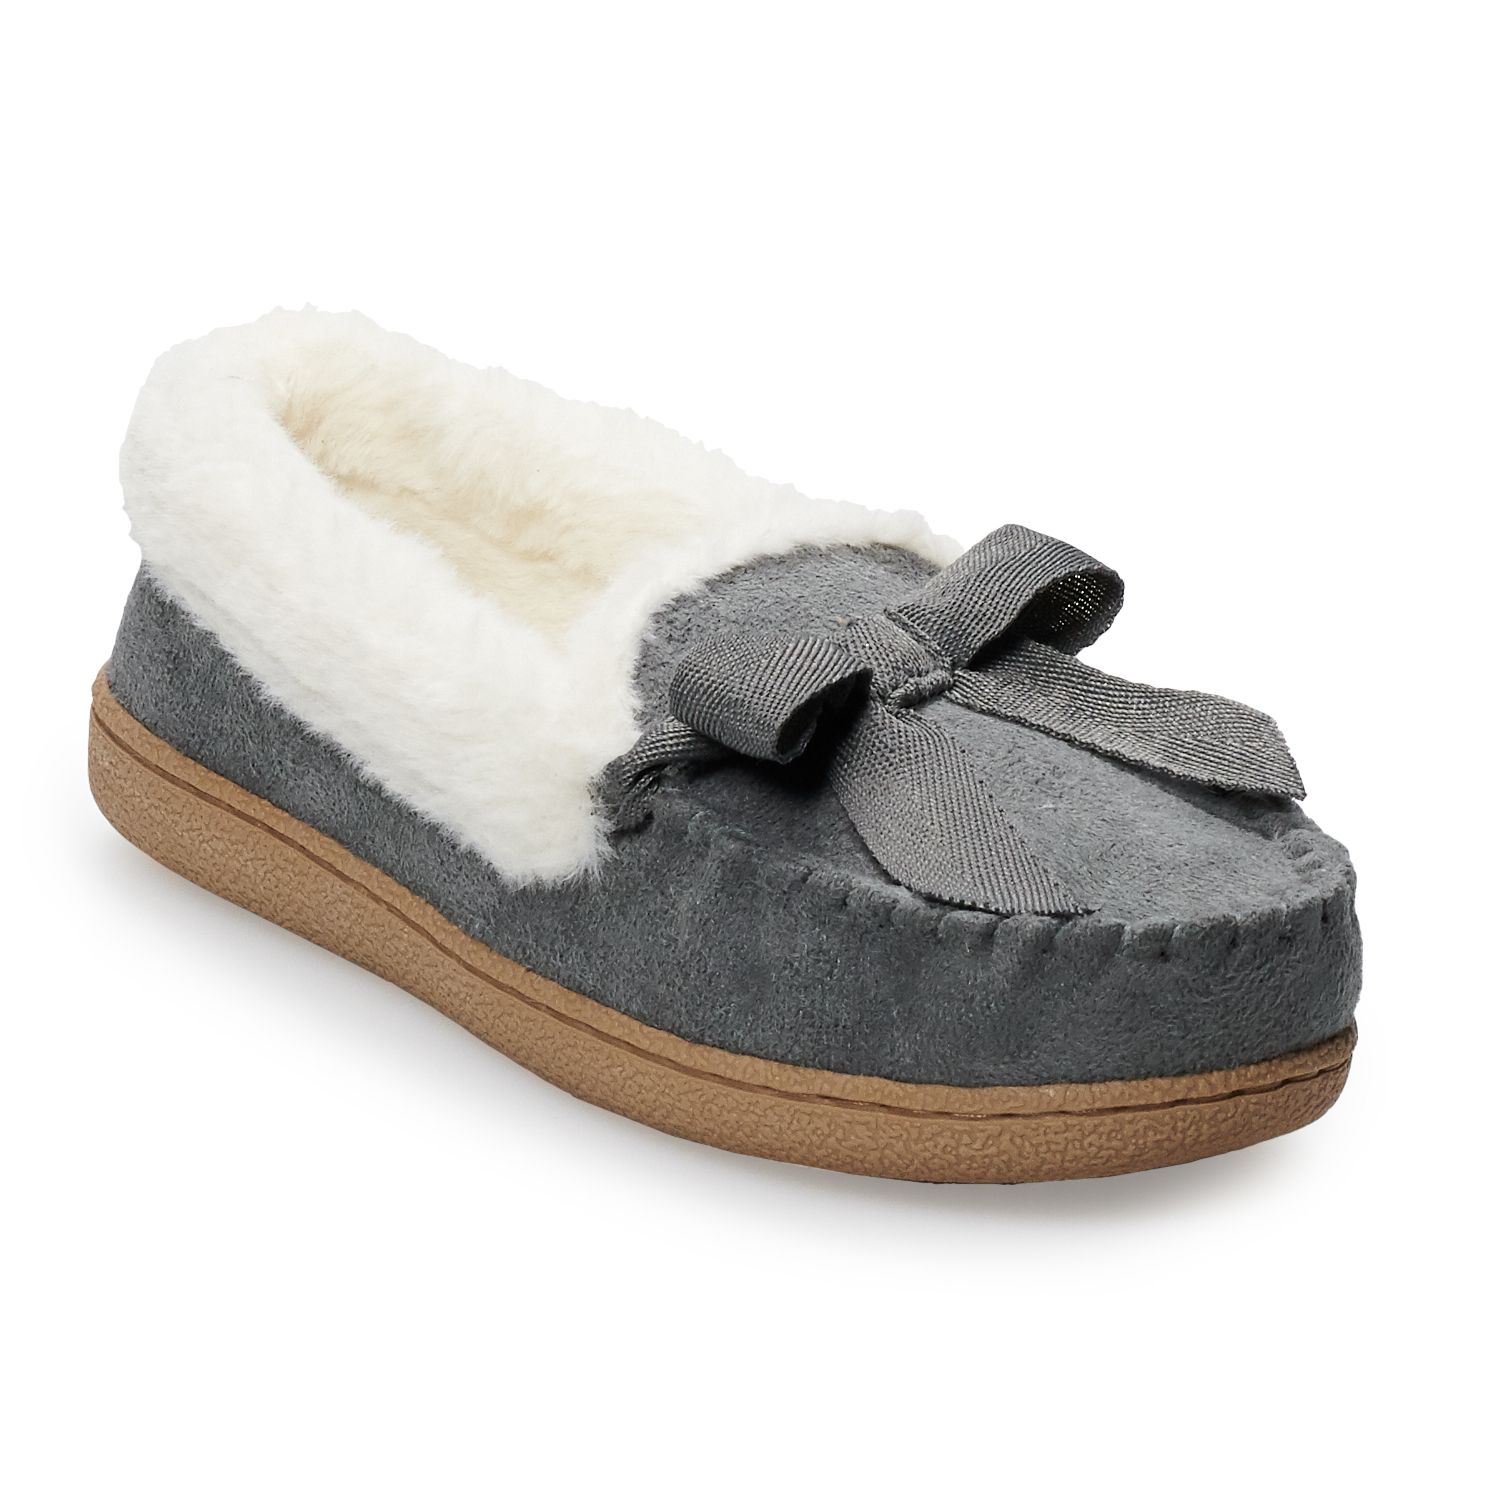 Slip On Moccasins and House Shoes for 